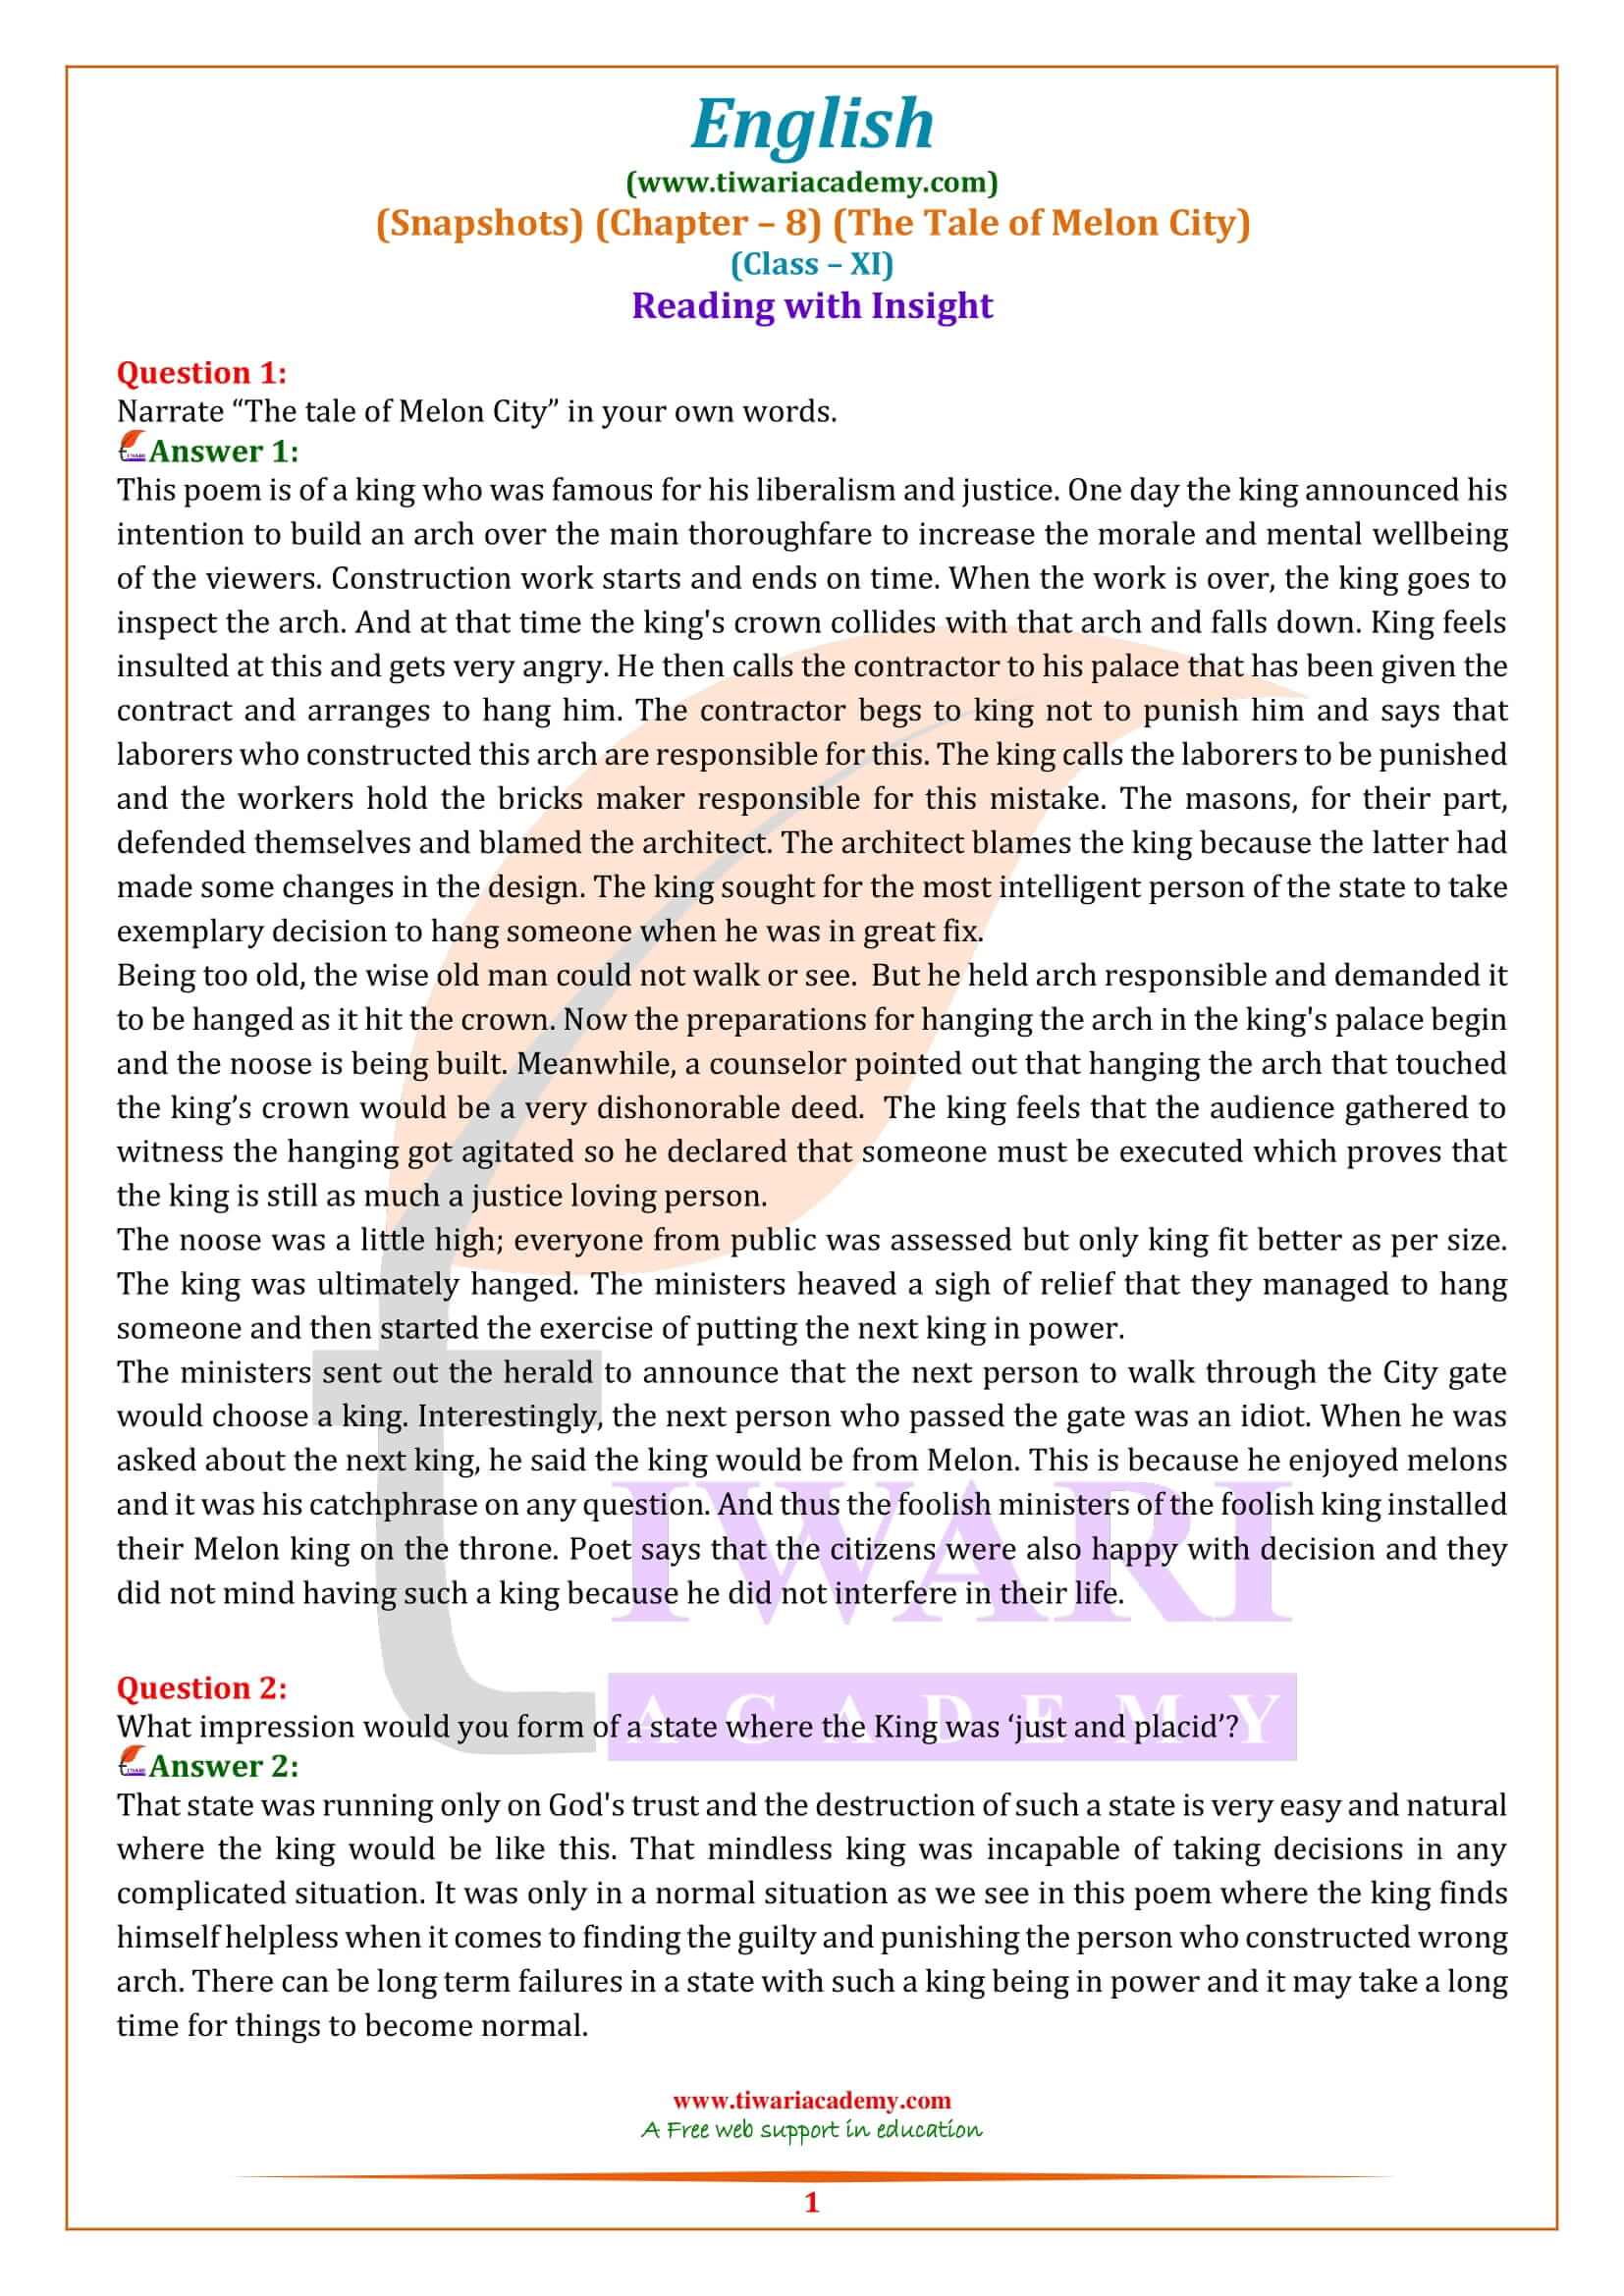 NCERT Solutions for Class 11 English Snapshots Chapter 8 Solutions